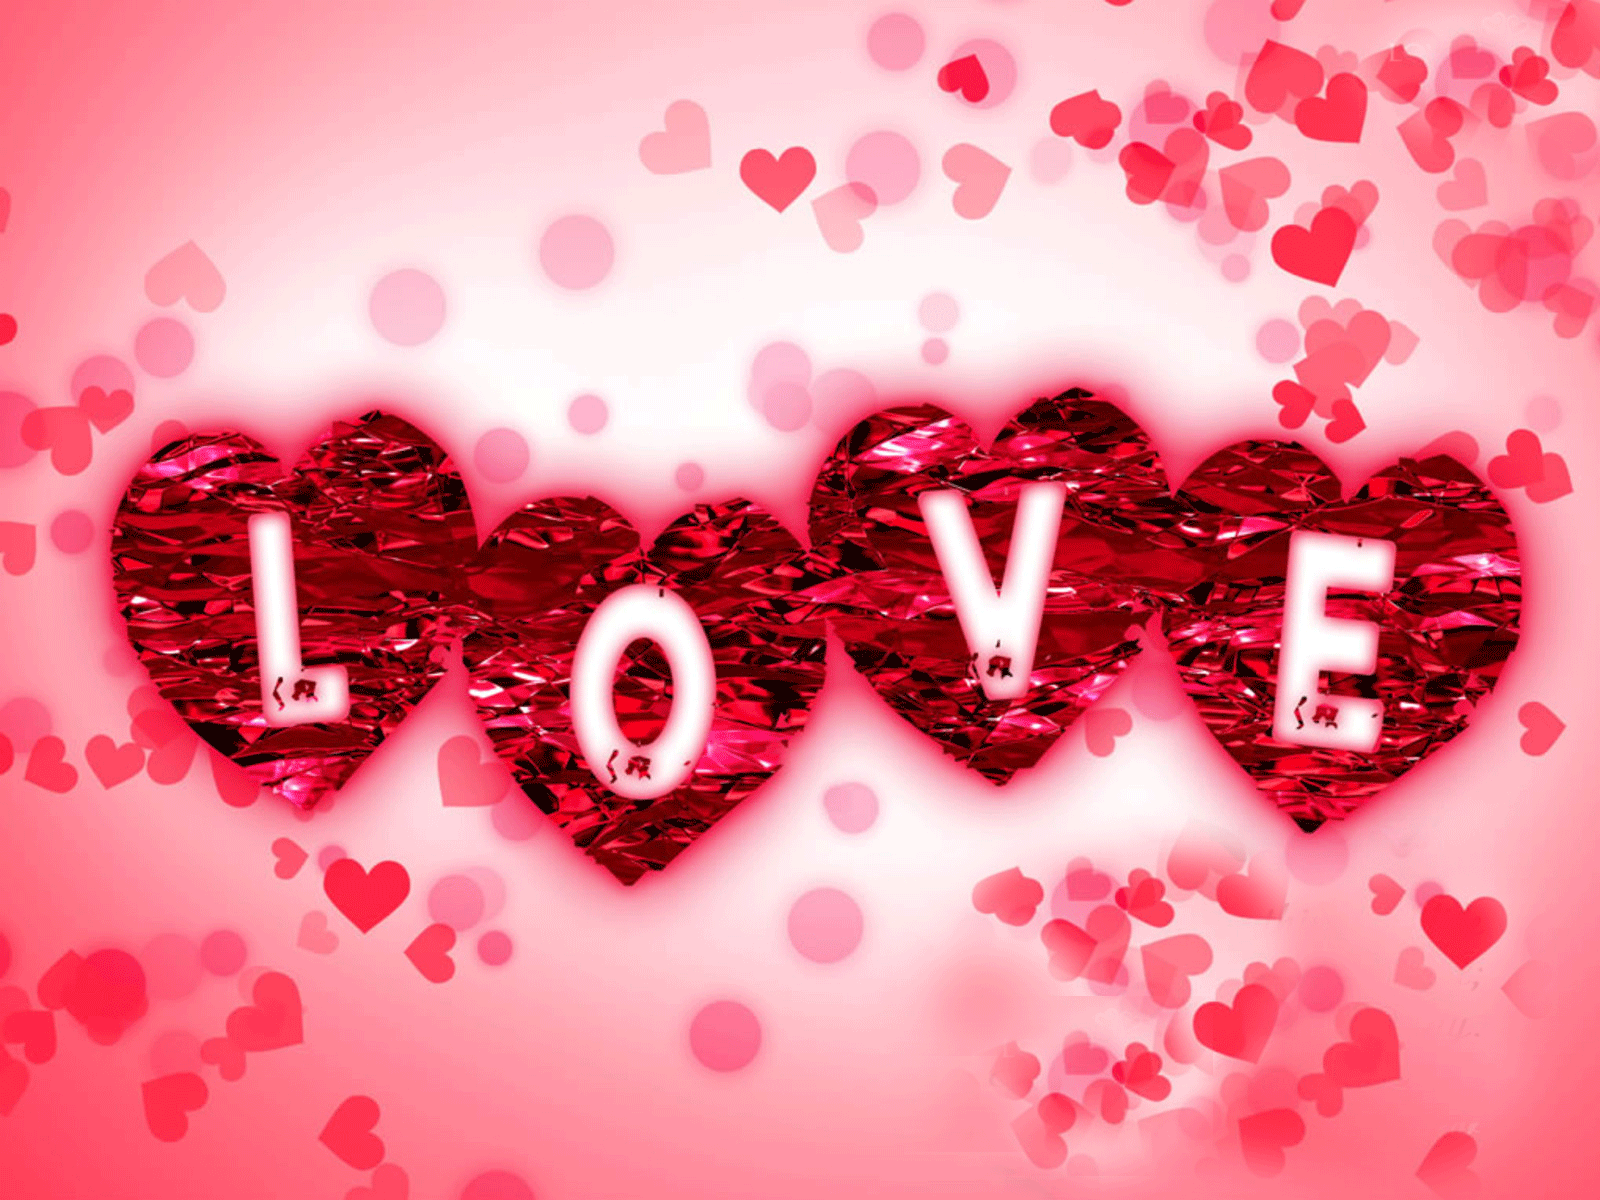 Love Hd Wallpaper Love Heart Picture Love Pictures Love